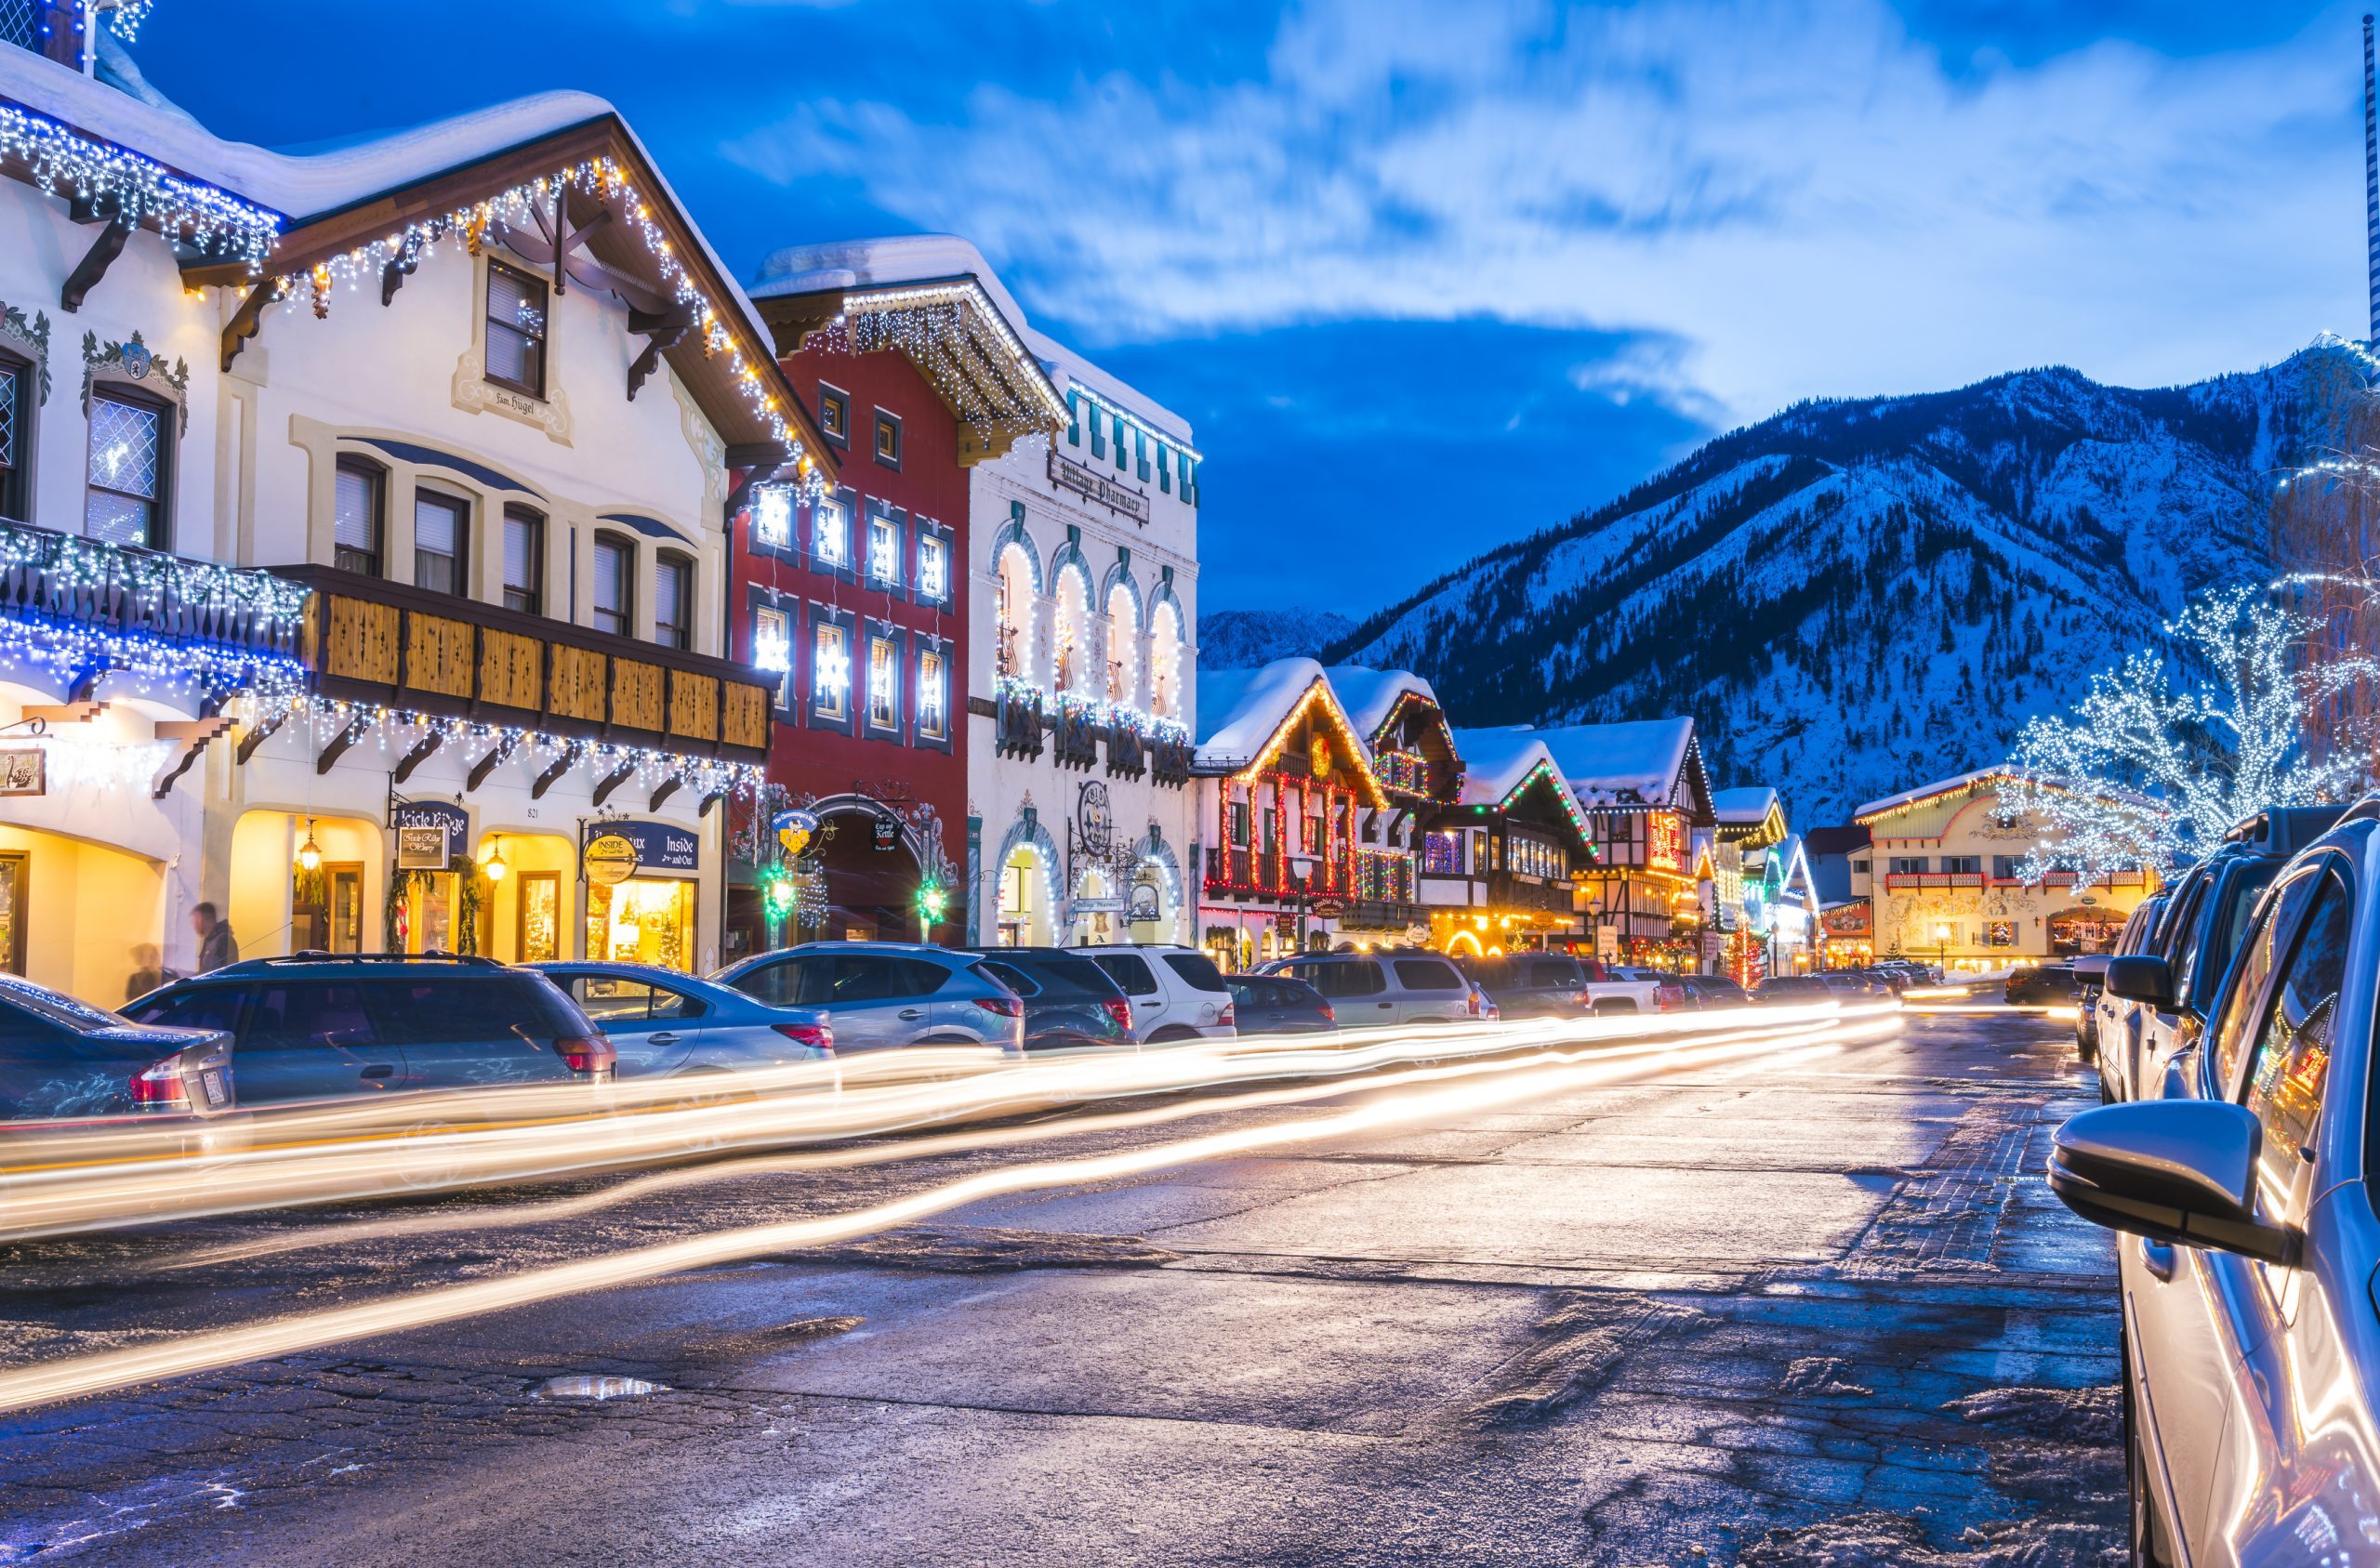 <p>The soft glow of lights, the window displays, the snow crunching underfoot, the warm scent of cinnamon and spice in the air…these Christmas towns are chock full of all the things we've come to associate with the holiday season. But what makes these villages the absolute best? Whether they've got the best <a href="https://www.rd.com/list/best-small-towns-christmas-lights/" rel="noopener noreferrer">Christmas light shows</a>, old-fashioned Victorian decorations, fun Christmas activities, things for kids to do, or have your best chance for a <a href="https://www.rd.com/list/places-to-have-white-christmas/">white Christmas</a>, these are the places you'll want to visit to feel as if you've stepped into a Hallmark movie.</p> <p>Some of the Christmas towns on our list exude Old World charm, with German markets, centuries-old traditions, or a focus on the <a href="https://www.rd.com/article/christmas-on-the-25th/">history of Christmas;</a> others feature huge, kitschy Christmas shops and even a giant Santa statue. Many are located in regions that get a lot of snow—but some southern locales also made our list, for those who prefer warmer weather and Christmas lights on palm trees instead. So no matter where you're located, there's a "Christmas village near me" to find. They all make for great<a href="https://www.rd.com/list/best-destinations-for-a-warm-christmas/"> Christmas getaways</a>, so we've also included <a href="https://www.rd.com/list/holiday-travel-tips/">holiday travel tips</a> on what to see and do, and where to stay, at each destination.</p> <h3>How we chose the best Christmas towns</h3> <p>Many of these towns have gained a reputation for going all out for Christmas, so our reporting included recommendations and ratings from travel experts and real travelers, including our own personal experience. We also confirmed the towns' Christmas events will be happening, safely, during 2021. However, be sure to double-check before booking, as event cancellations due to the pandemic are always possible. Also, check state and local Covid protocols and requirements before you travel.</p>